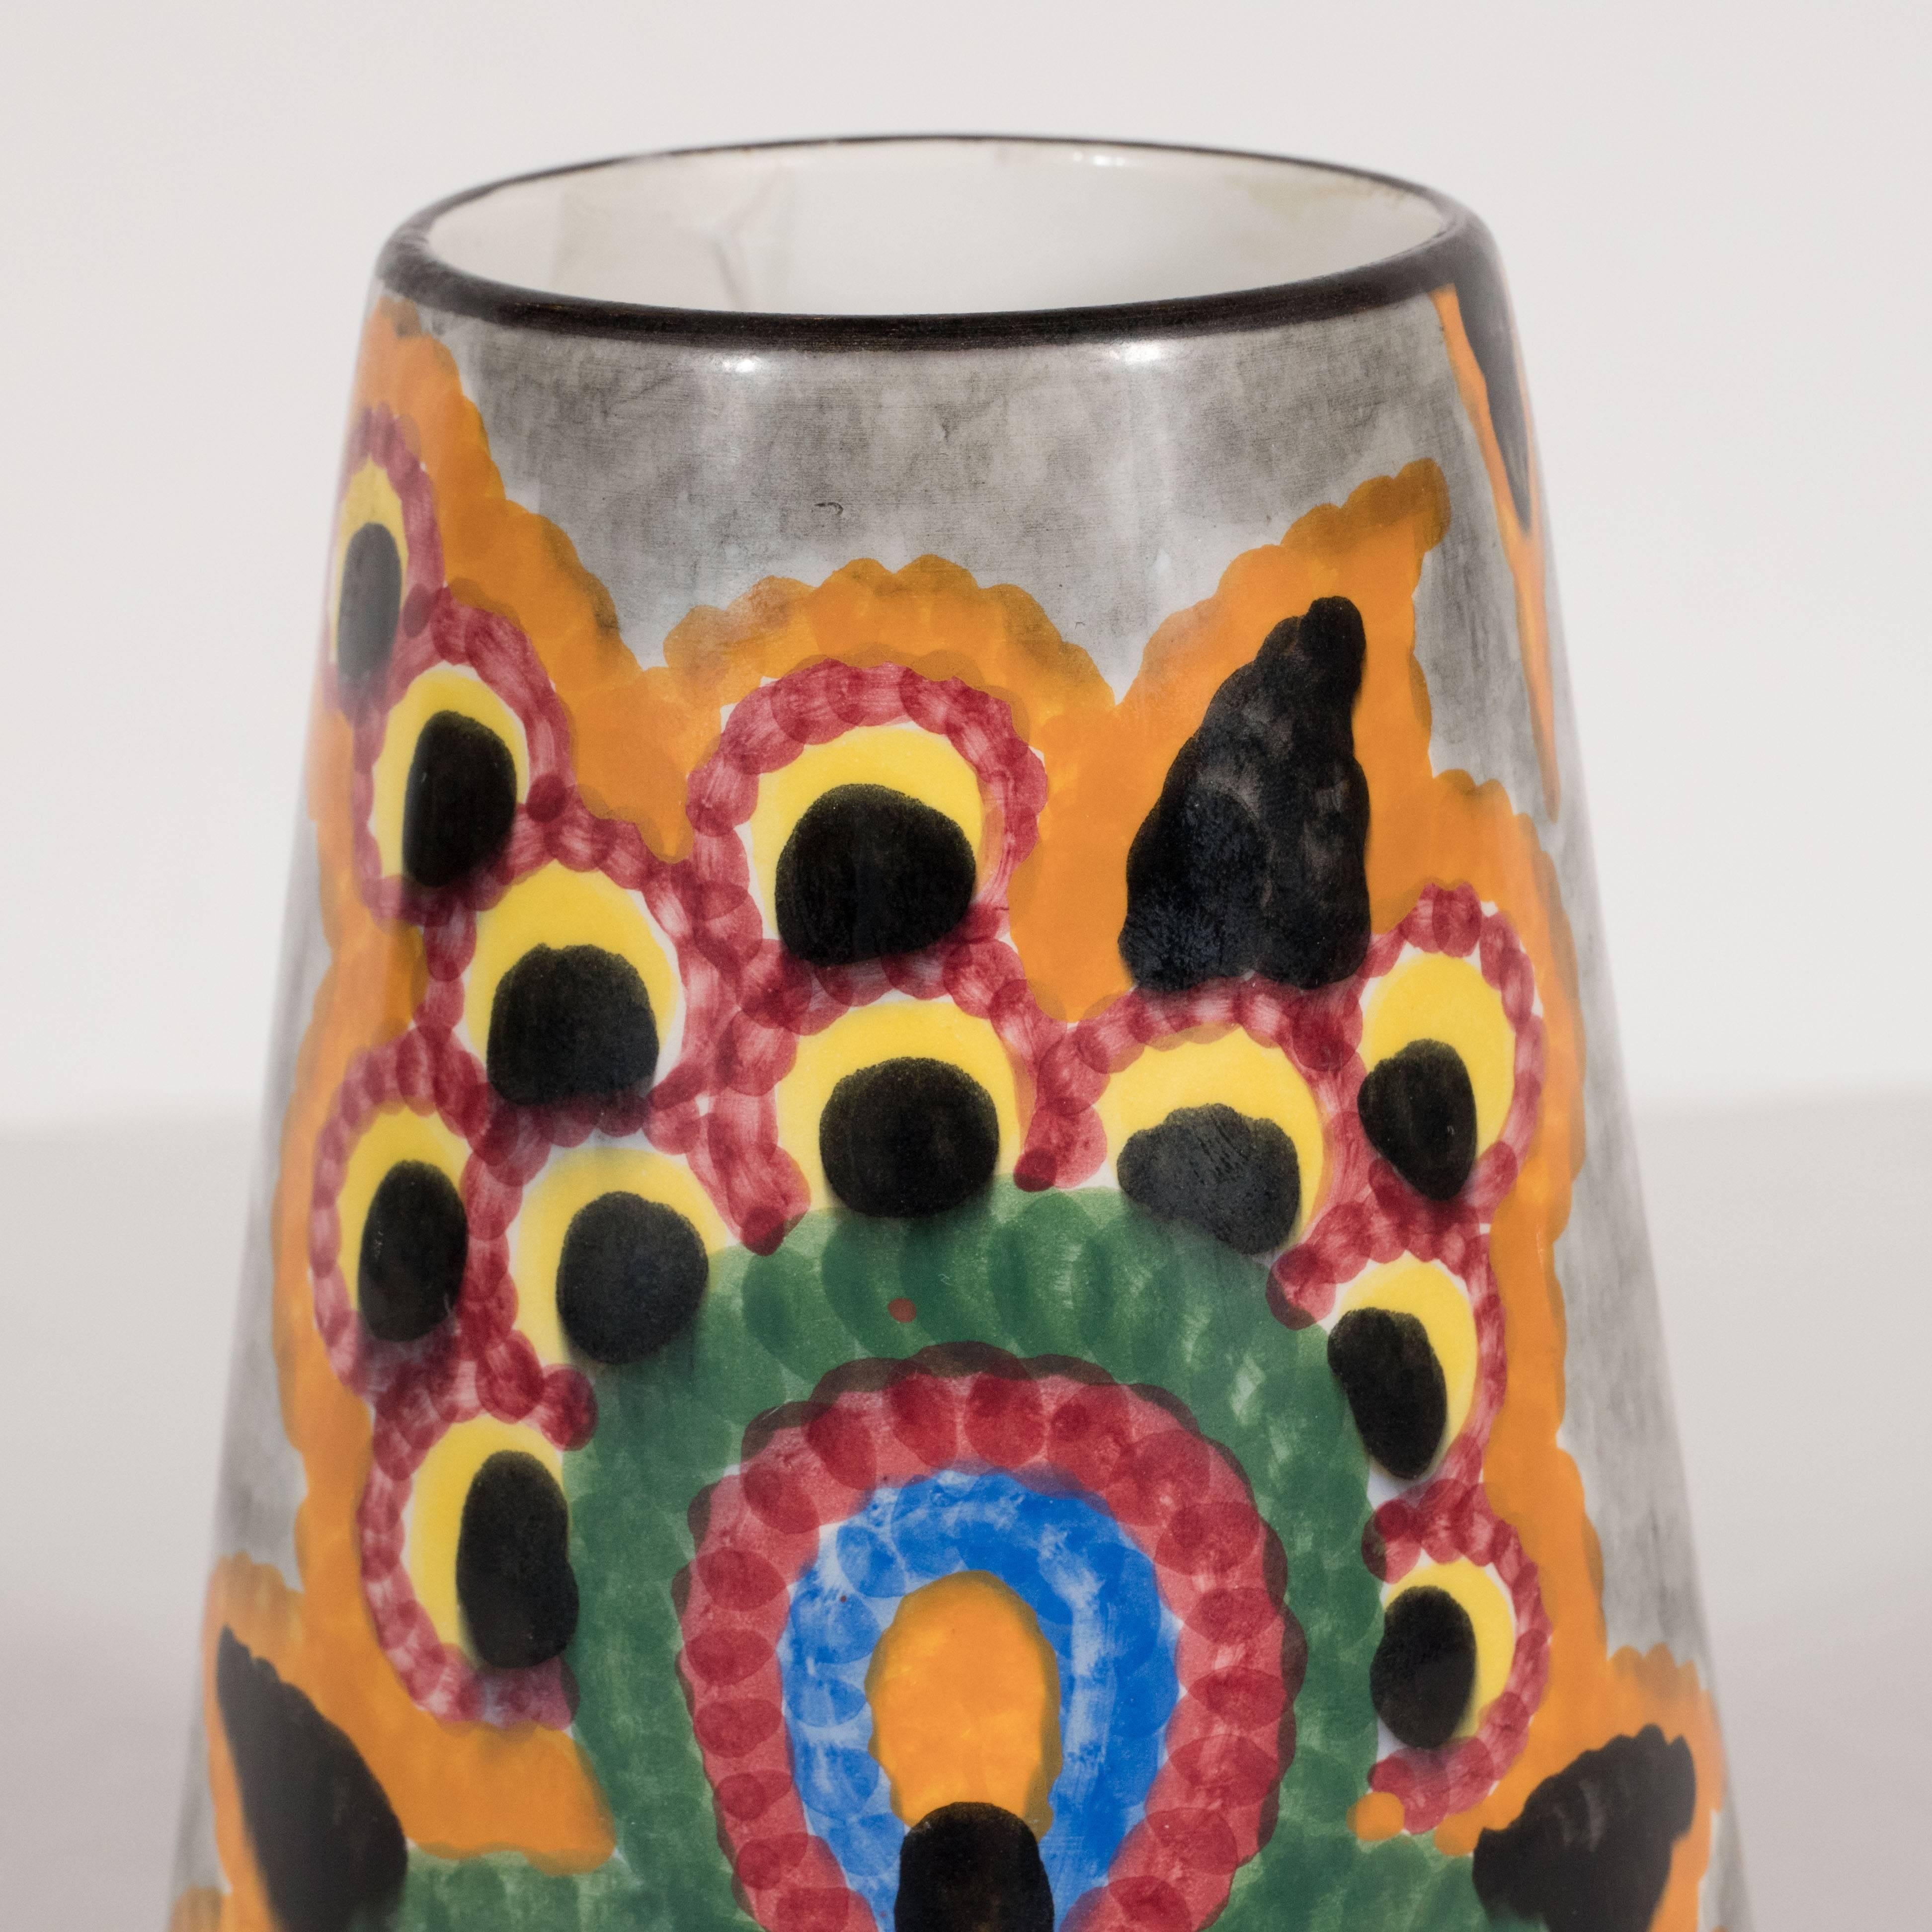 This gorgeous vase was realized by Schramberg SMF- one of Germany's most esteemed pottery studios since 1820. It has been meticulously handpainted in tones of pumpkin, pomegranate, mint, sky blue and sunshine yellow with black and smoke gray